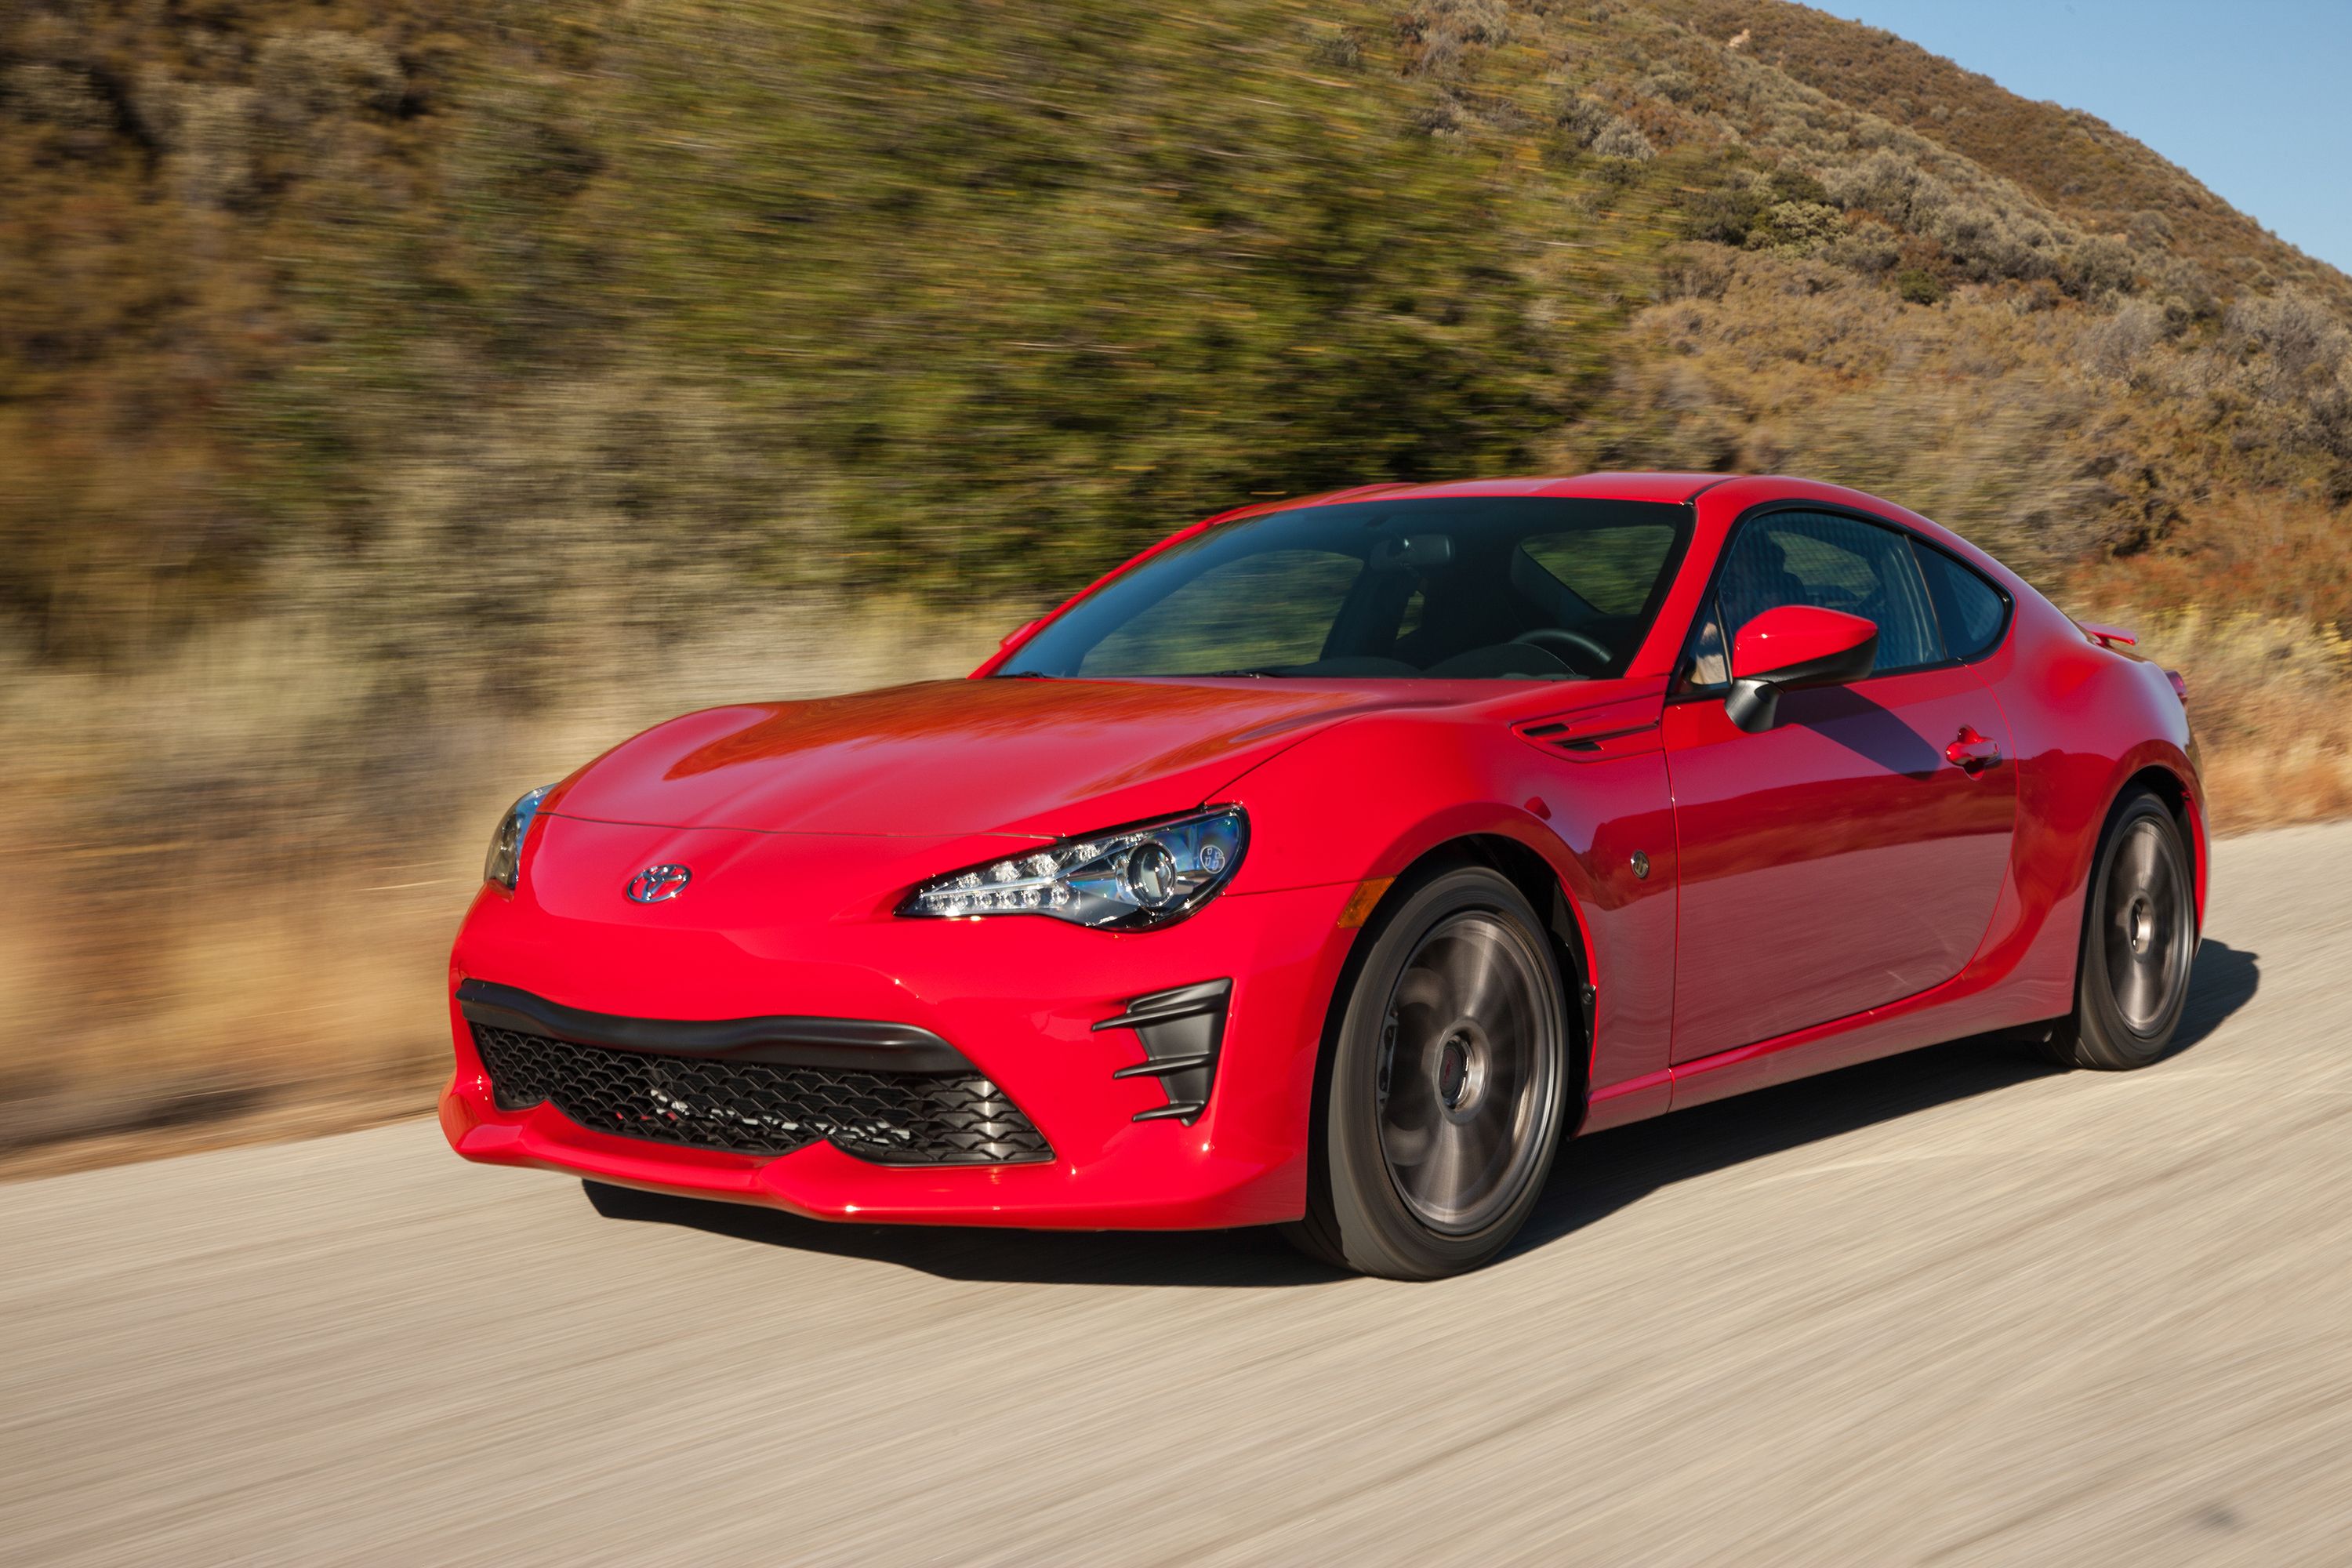 2020 The 2021 Subaru BRZ and Toyota 86 - A New Platform and More Power